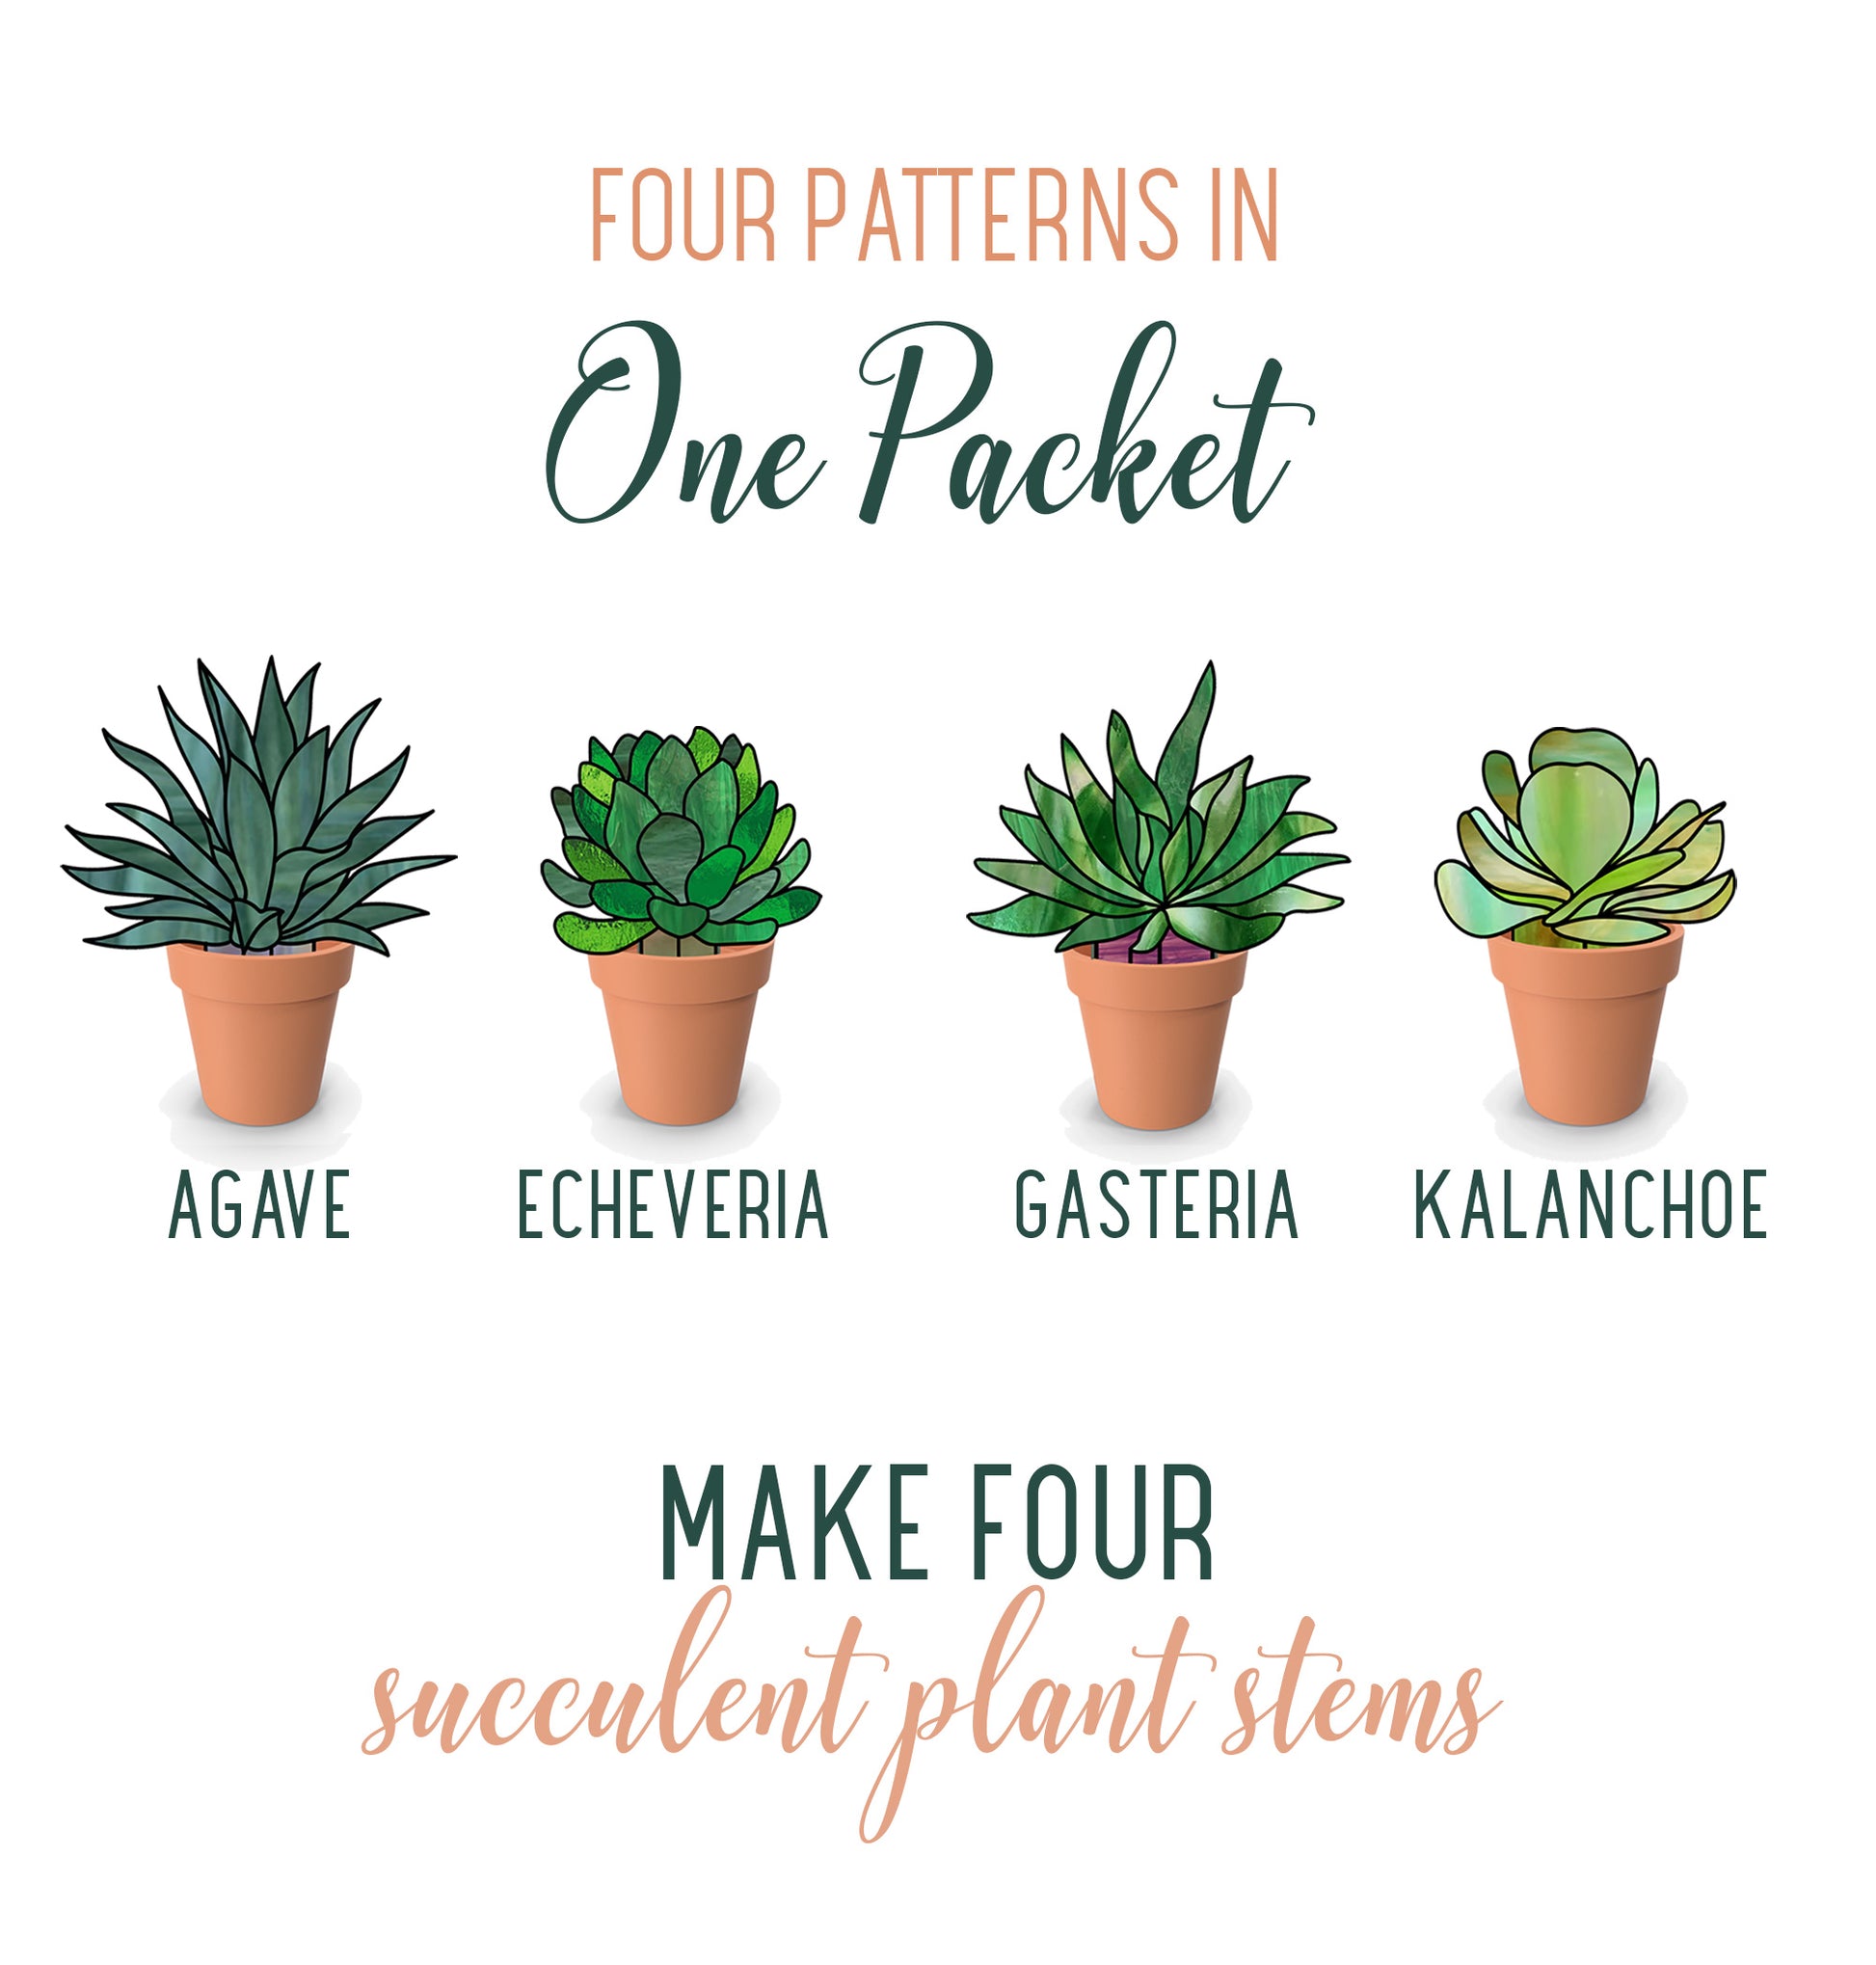 Original stained glass patterns for four succulent plant stems, instant PDF download, four patterns in one packet